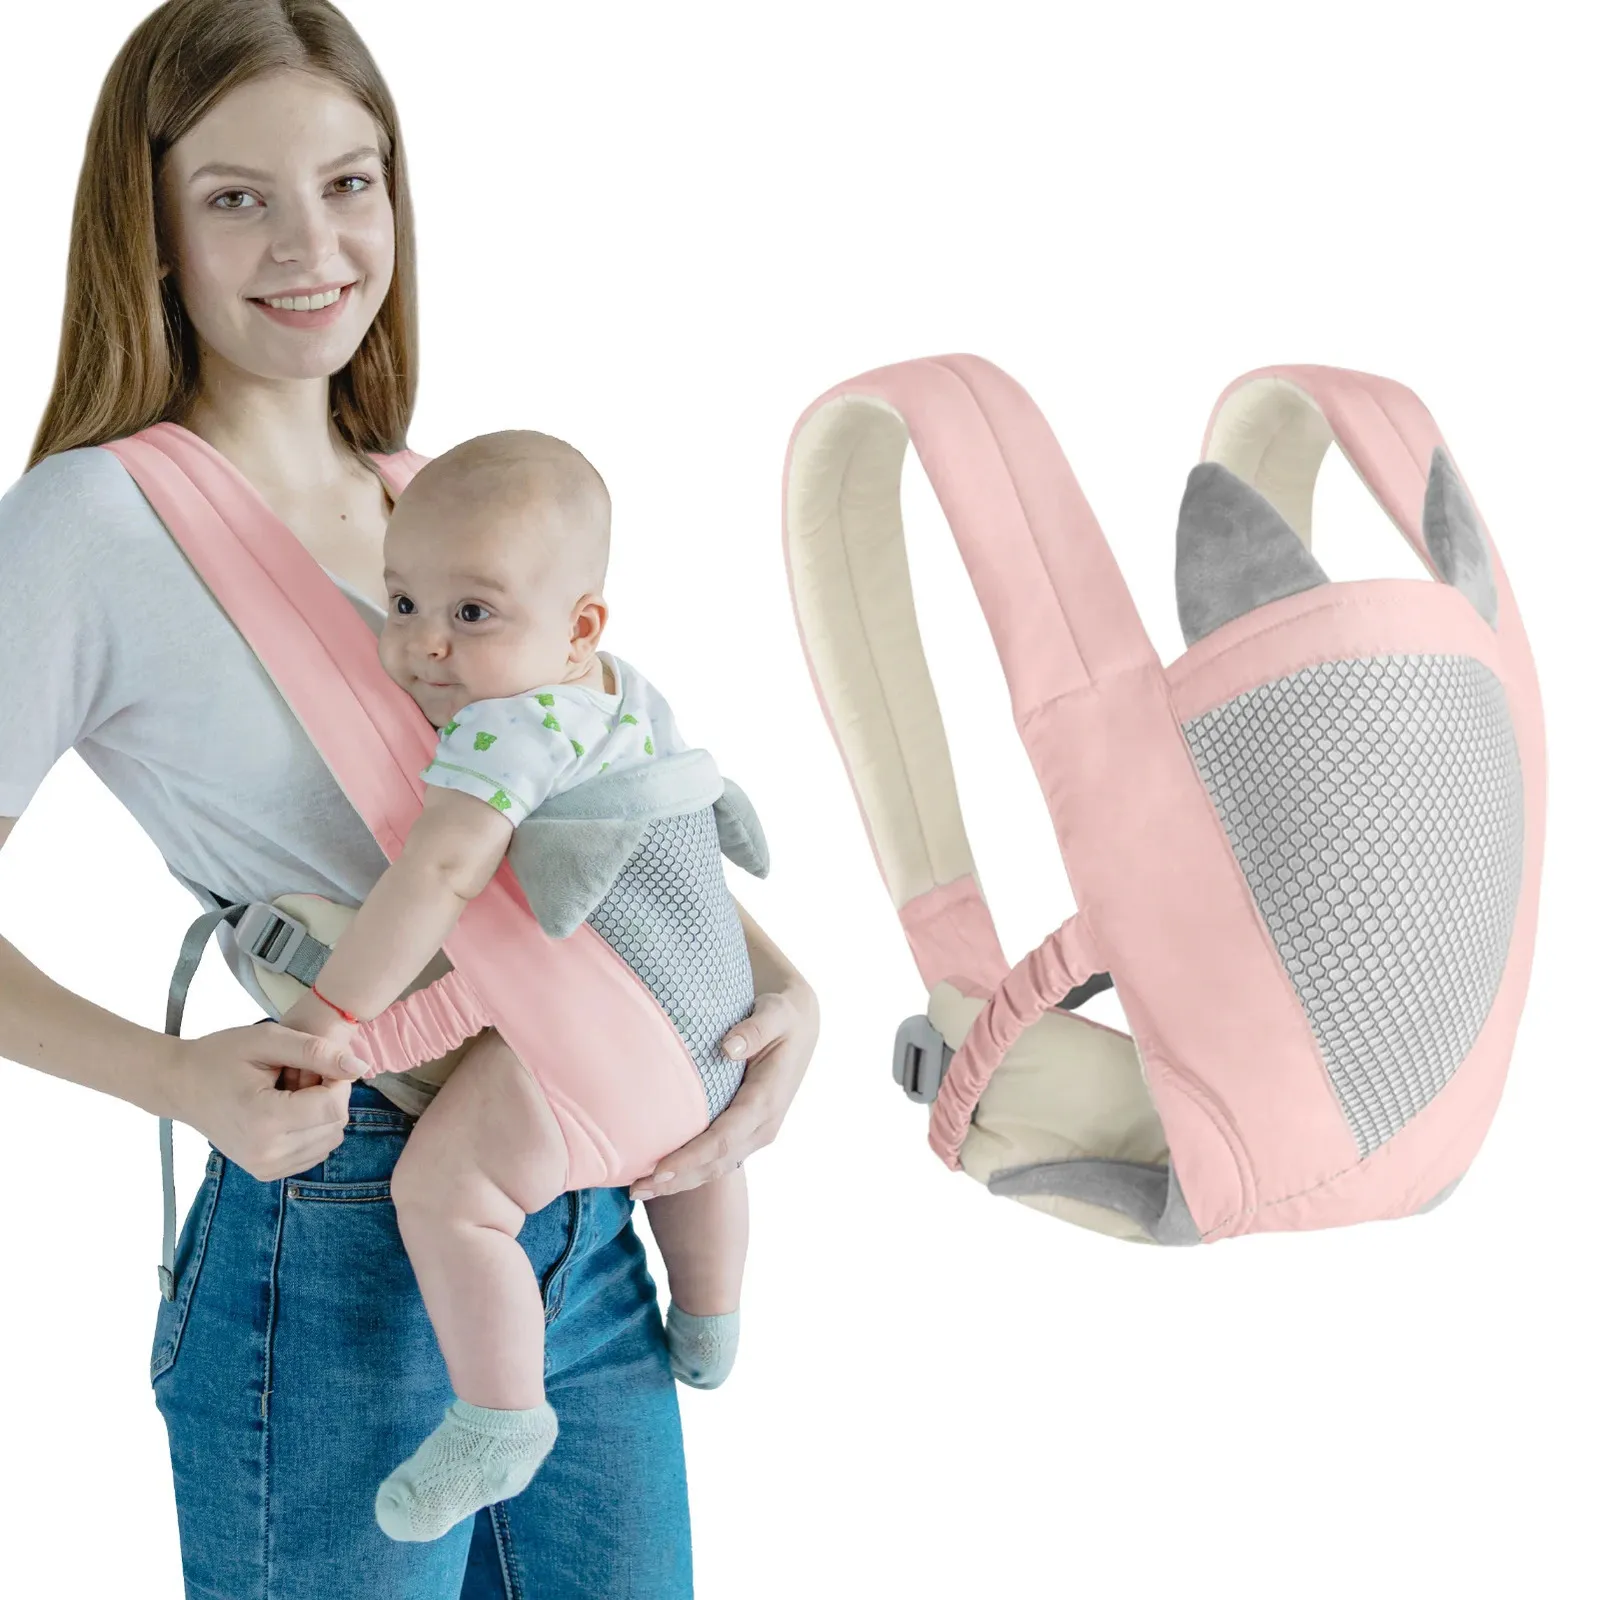 born Baby Sling Multifunctional Kangaroo Infant Holder Sling Wrap Backpacks Baby Outdoor Travel Activity Accessories 231228